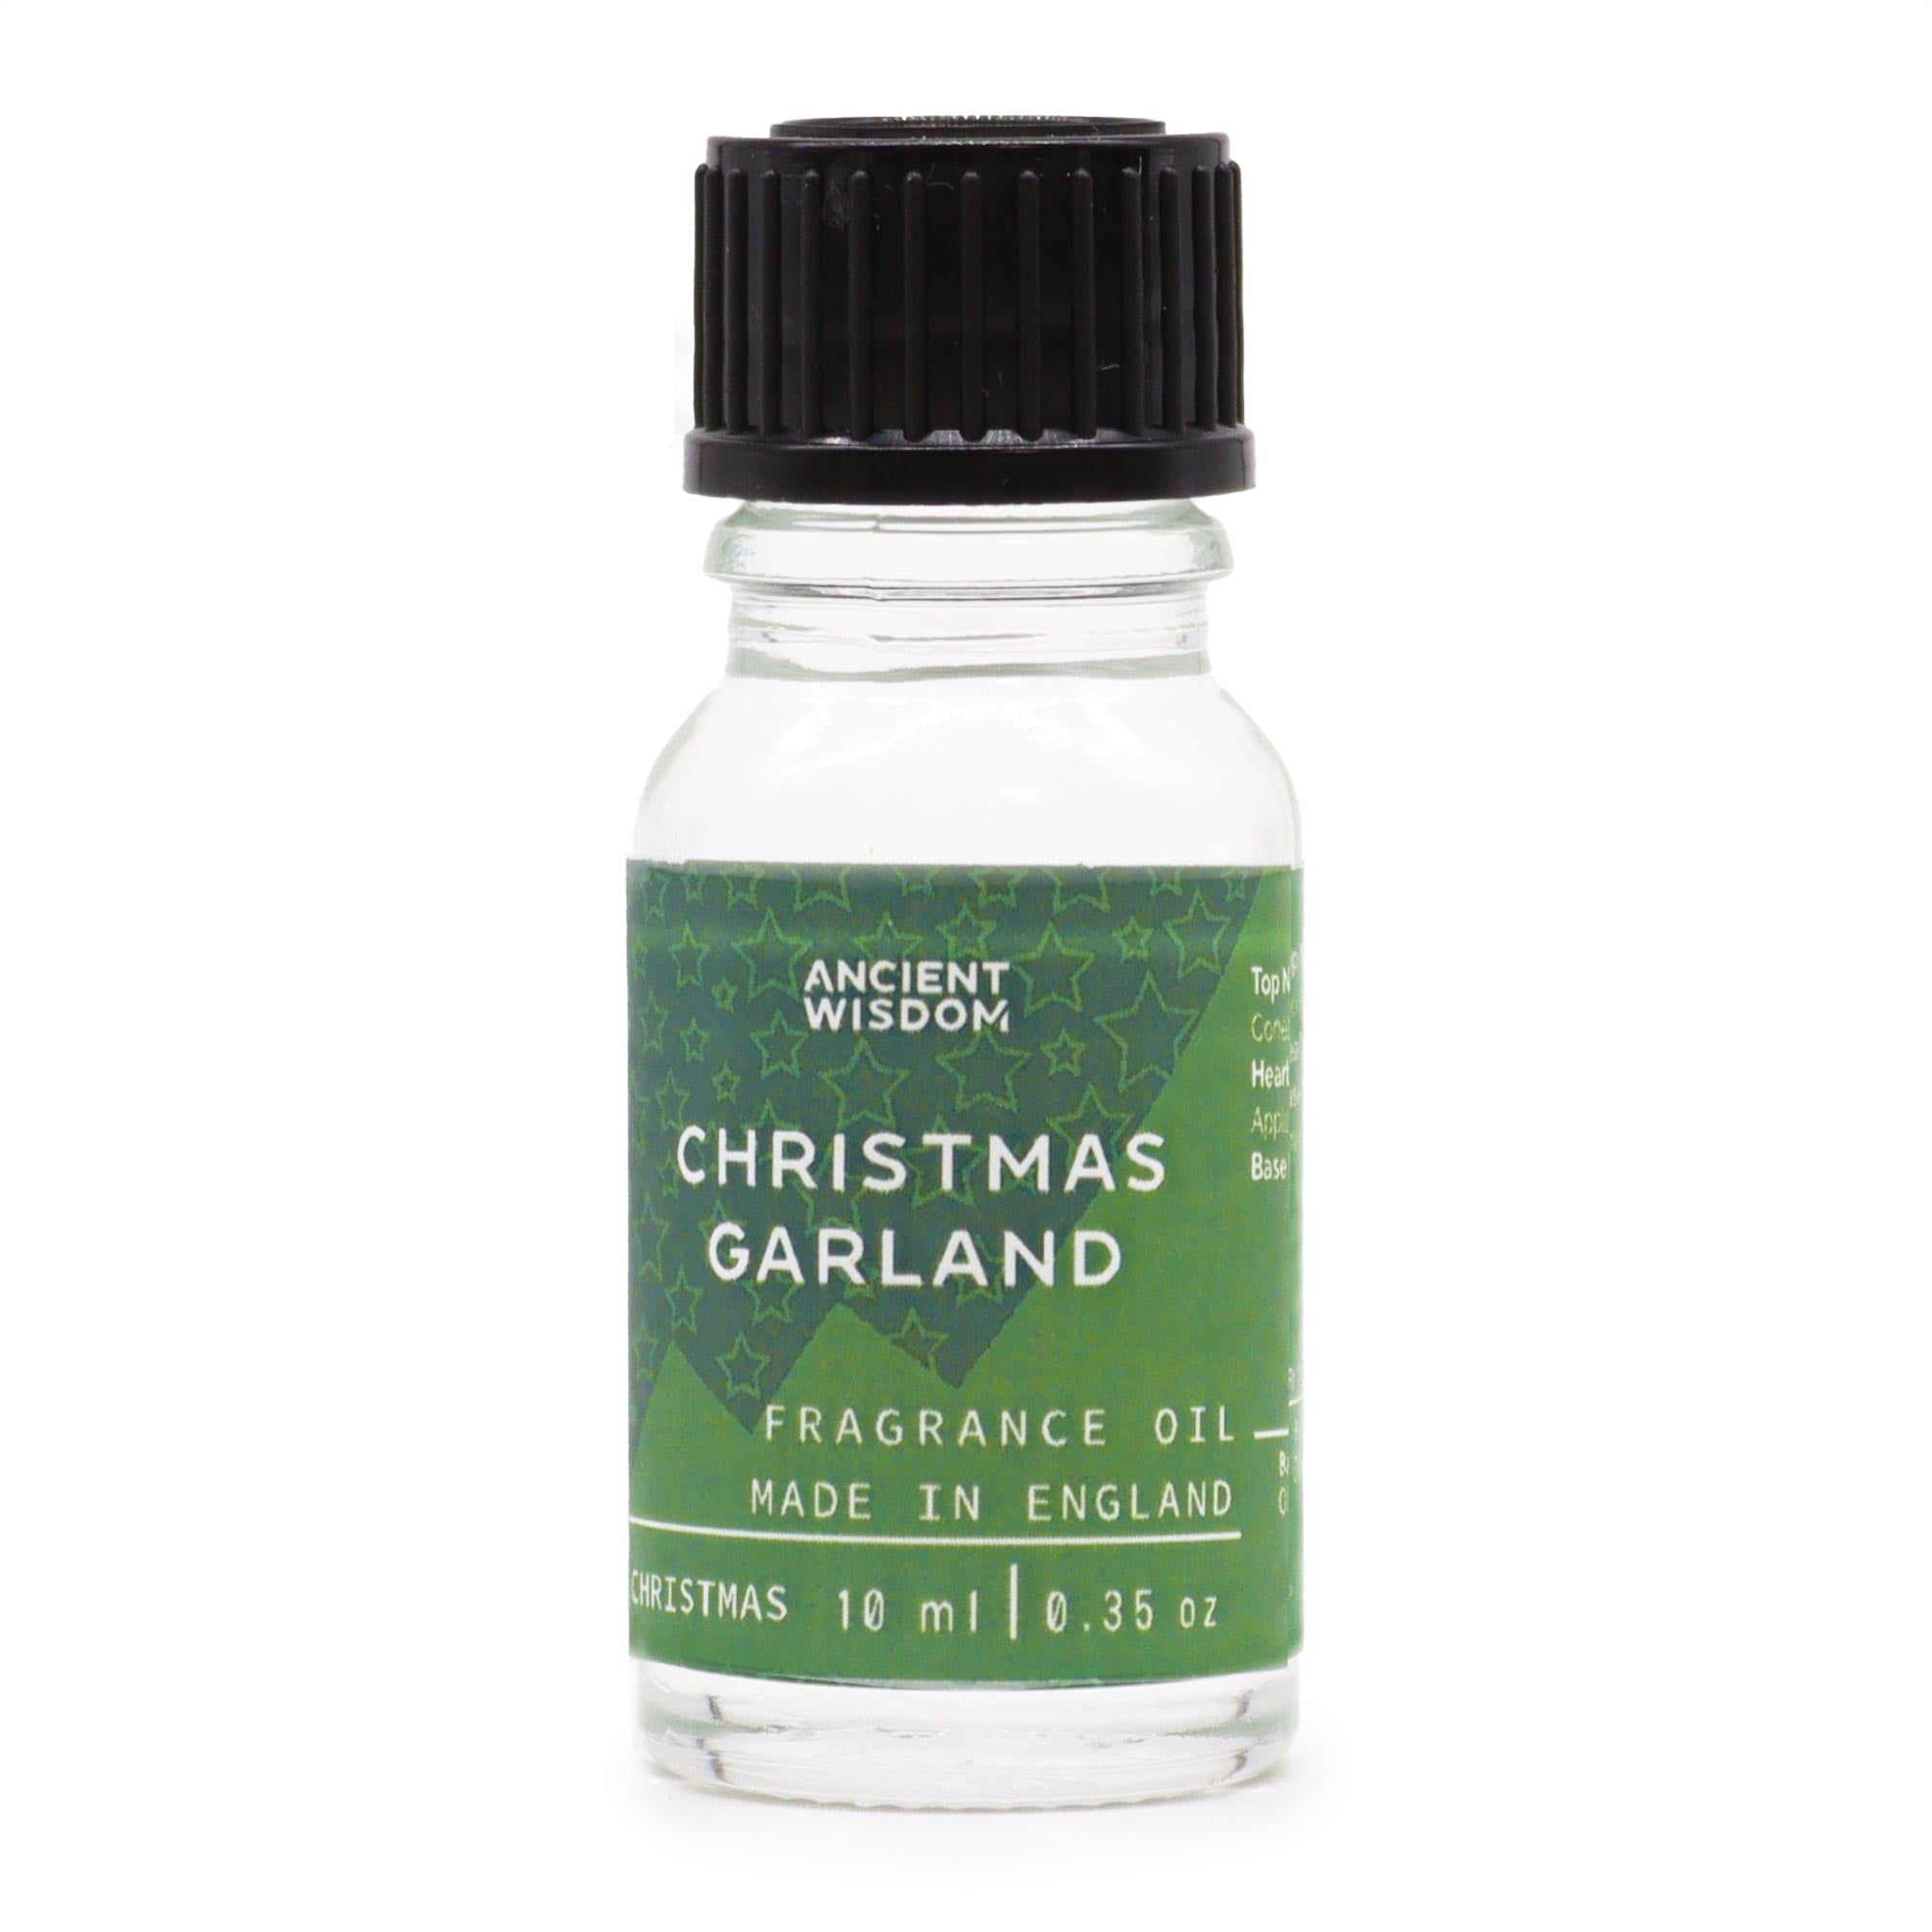 View Christmas Garland Fragrance Oil 10ml information